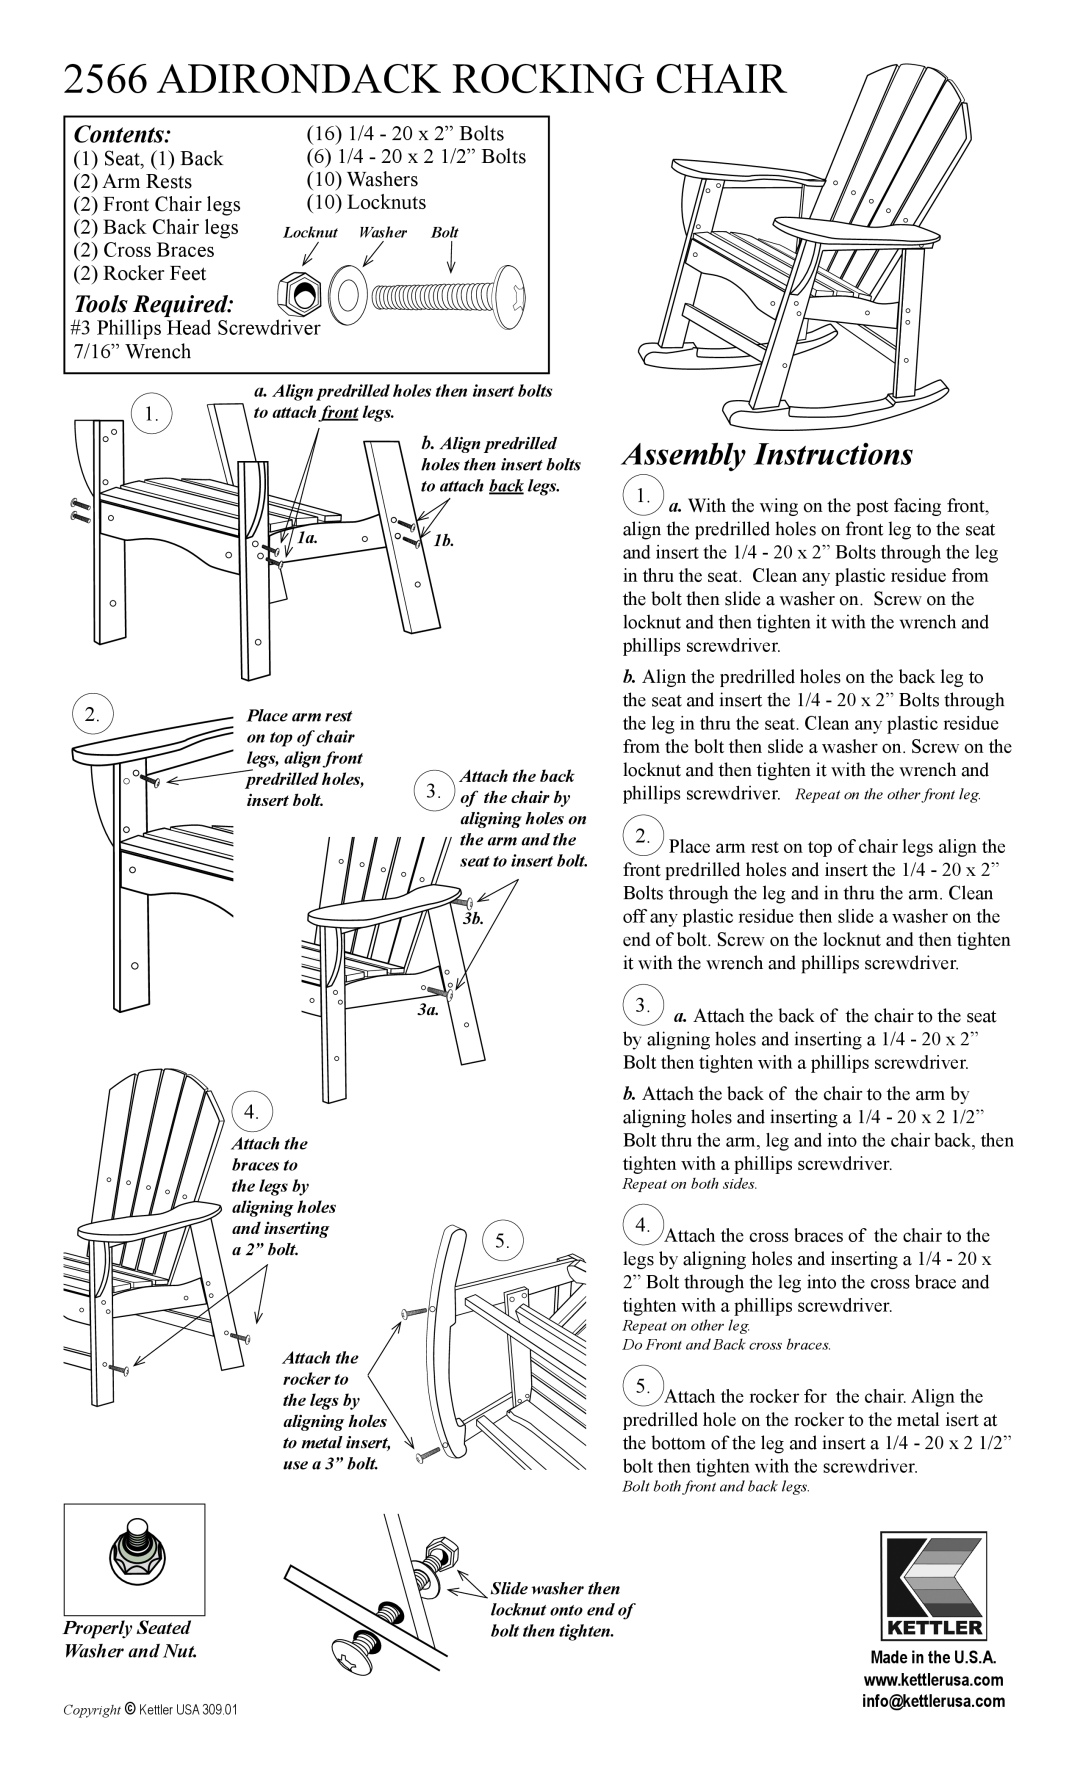 Kettler 2566 manual Adirondack Rocking Chair, Assembly Instructions, Contents, Tools Required 